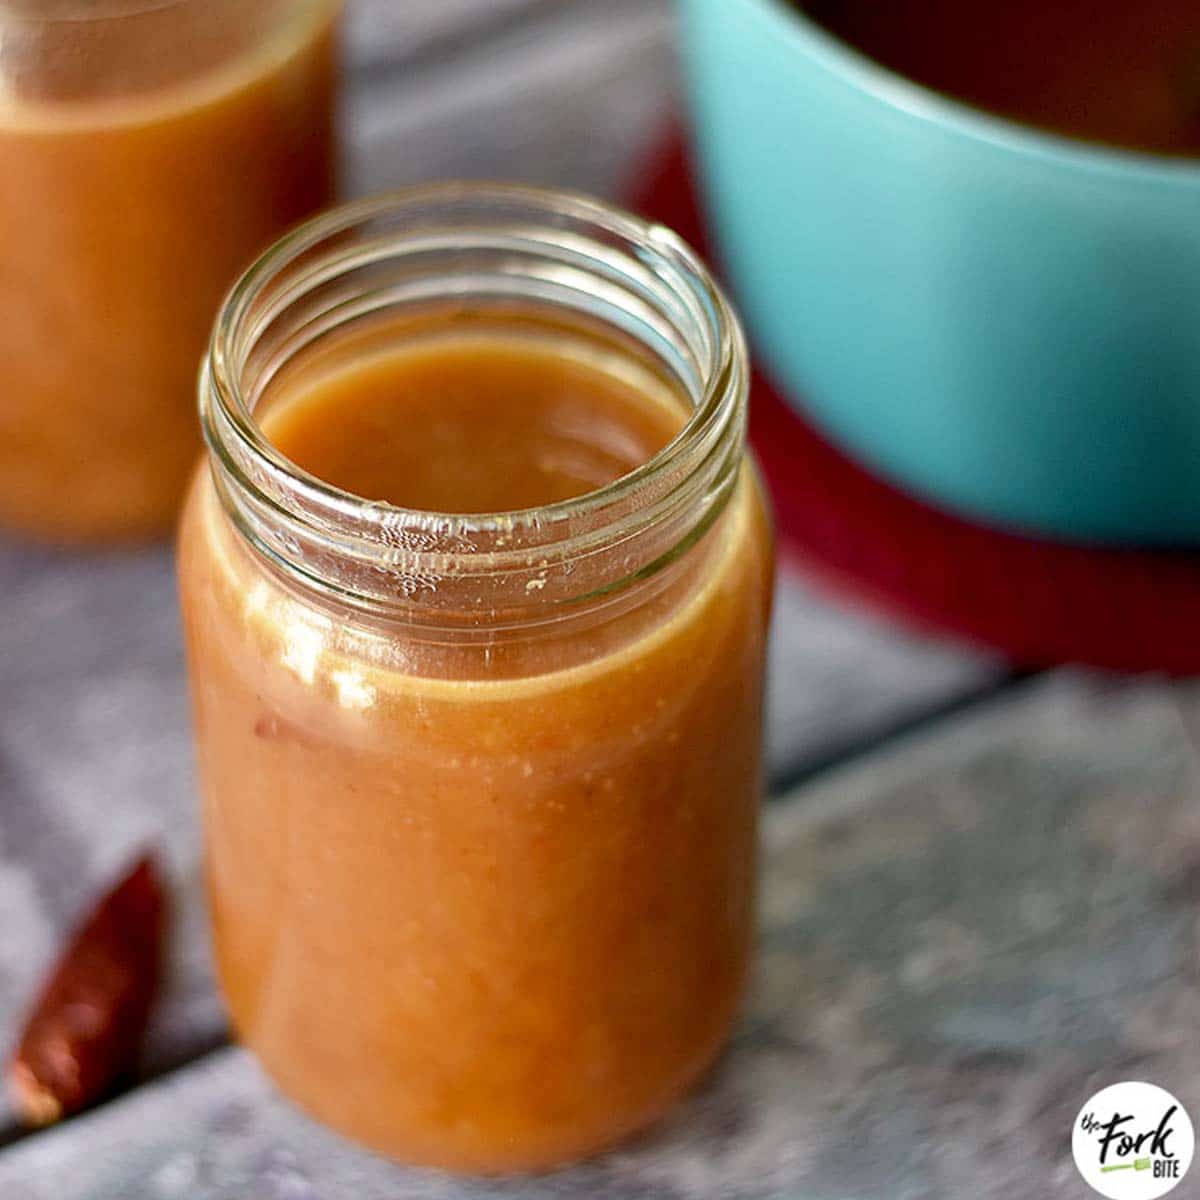 Enjoy Pad Thai anytime using this Pad Thai Sauce. This perfectly sweet, tangy , a bit salty sauce with a little kick of spice is so easy and quick to make so you'll have a perfect dish every time.